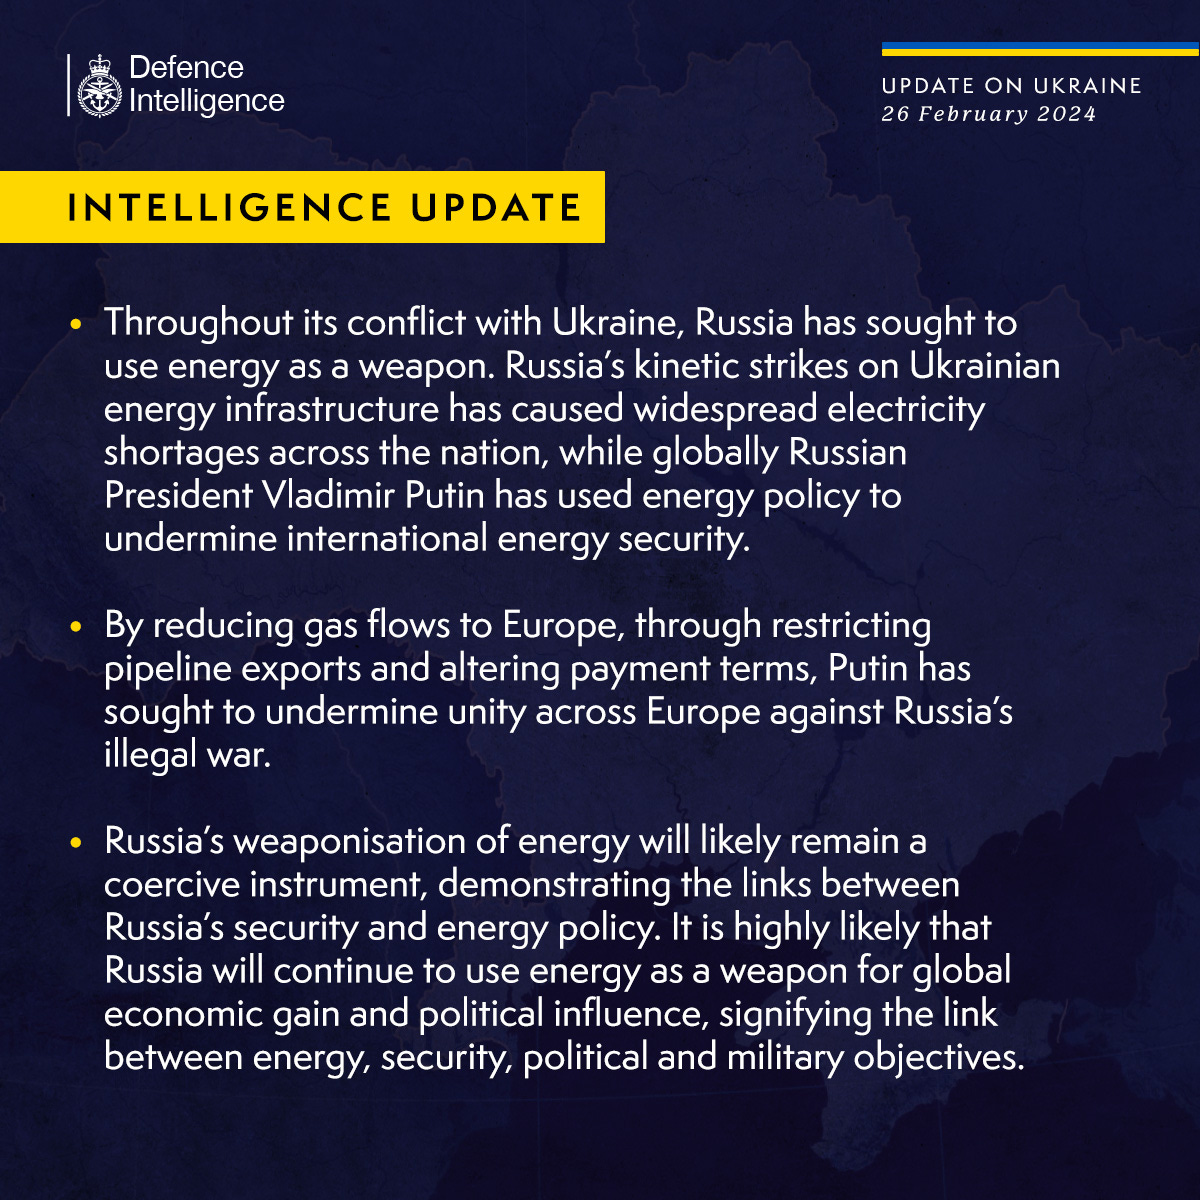 Throughout its conflict with Ukraine, Russia has sought to use energy as a weapon. Russia’s kinetic strikes on Ukrainian energy infrastructure has caused widespread electricity shortages across the nation, while globally Russian President Vladimir Putin has used energy policy to undermine international energy security.
 
By reducing gas flows to Europe, through restricting pipeline exports and altering payment terms, Putin has sought to undermine unity across Europe against Russia’s illegal war.
 
Russia’s weaponisation of energy will likely remain a coercive instrument, demonstrating the links between Russia’s security and energy policy. It is highly likely that Russia will continue to use energy as a weapon for global economic gain and political influence, signifying the link between energy, security, political and military objectives.